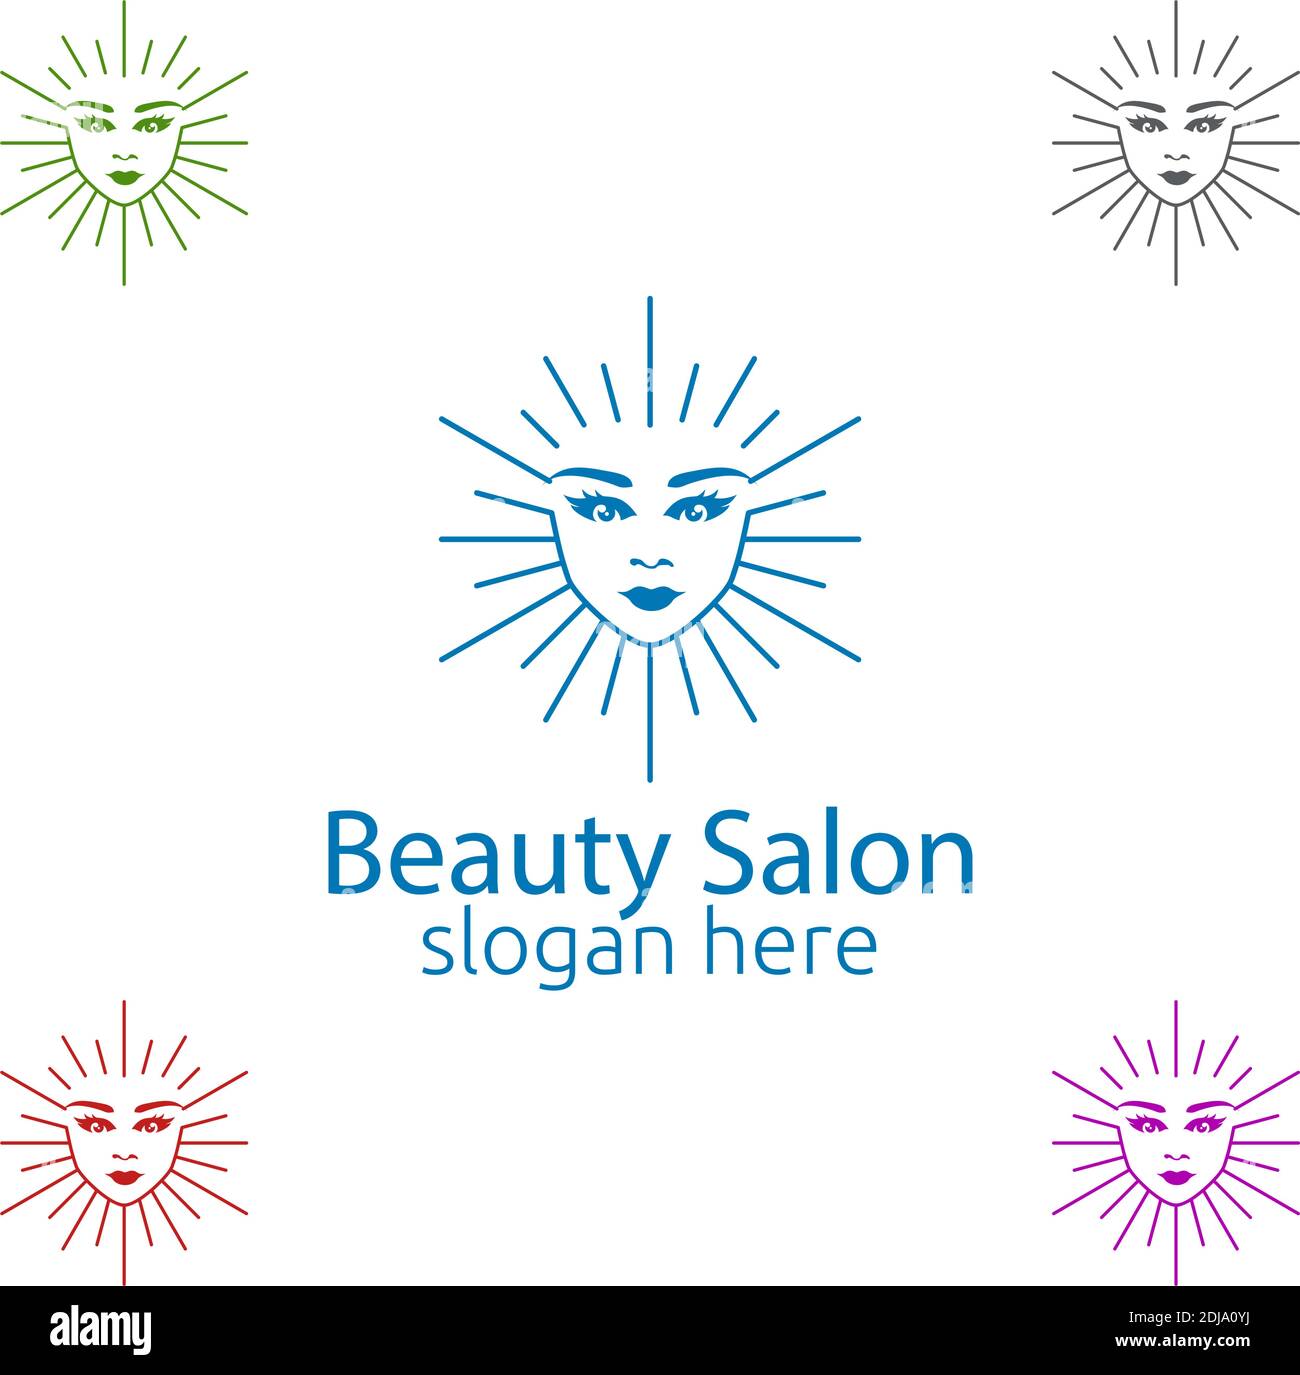 Salon Fashion Logo for Beauty Hairstylist, Cosmetics, or Boutique Design Stock Vector